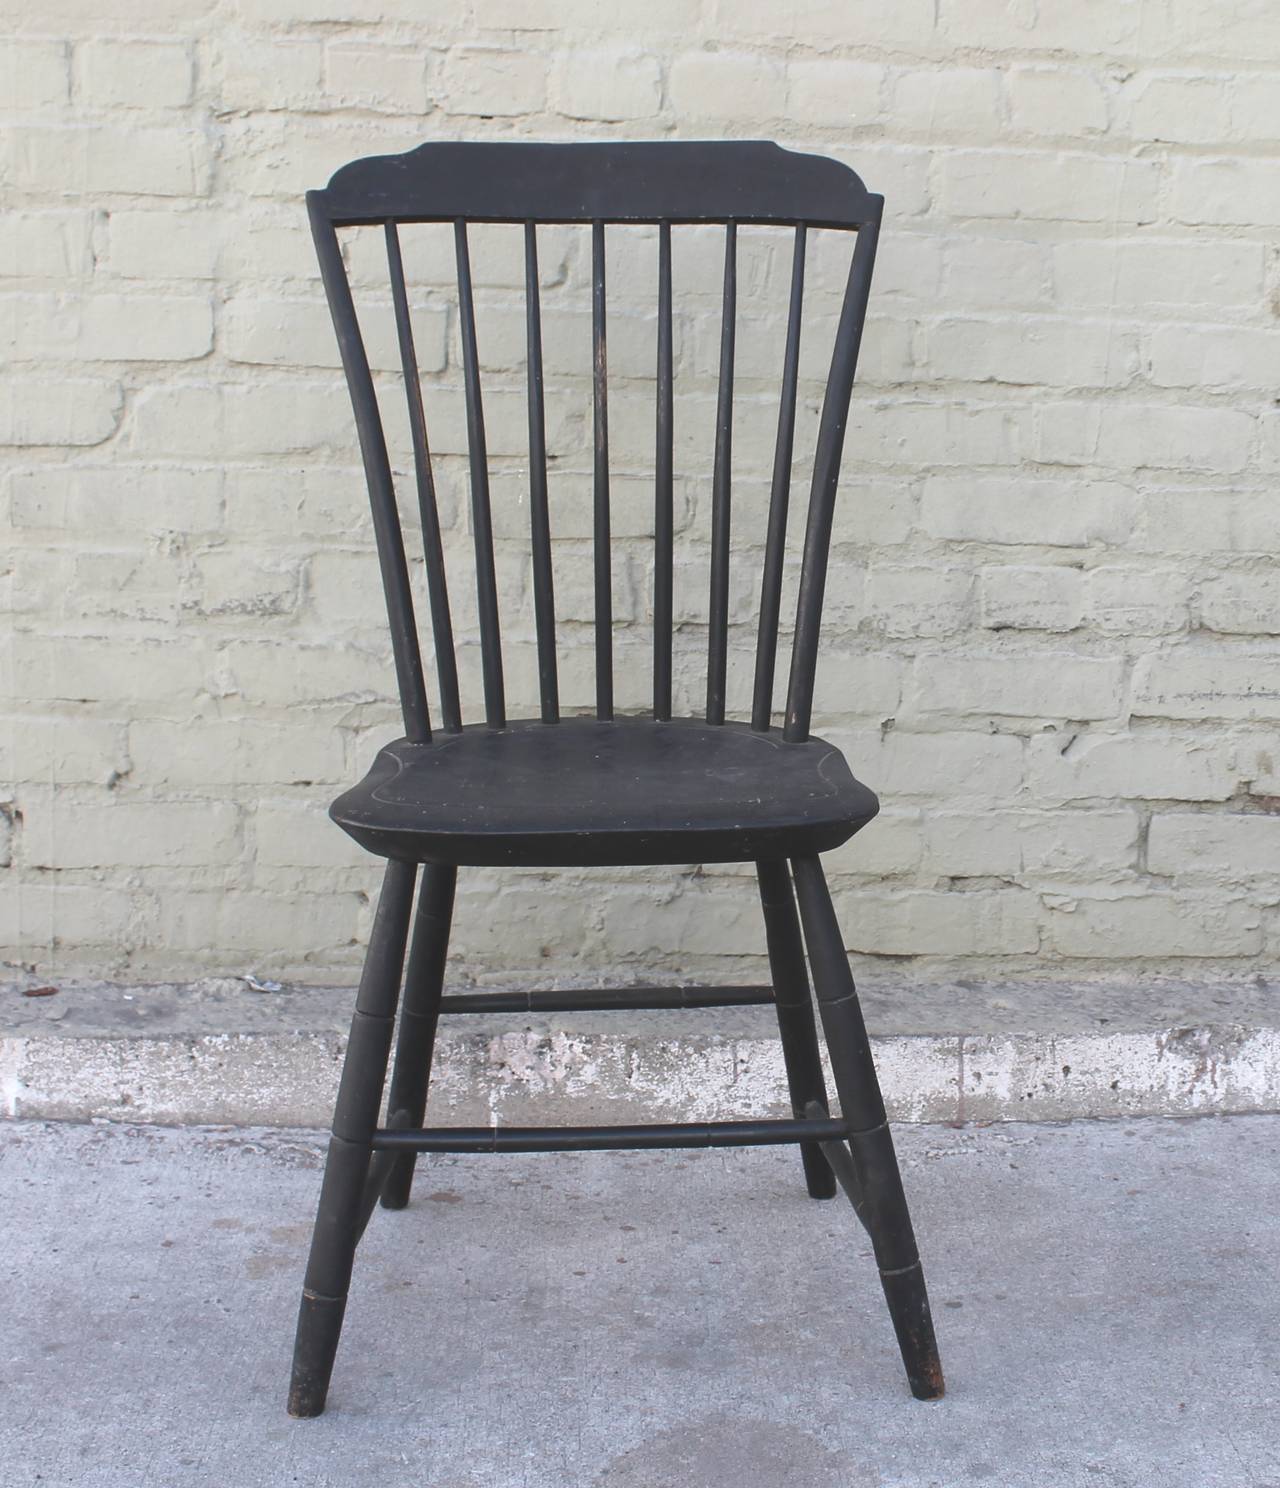 Country Original Black Painted Step Down New England Windsor Chair, Dated 1812 For Sale